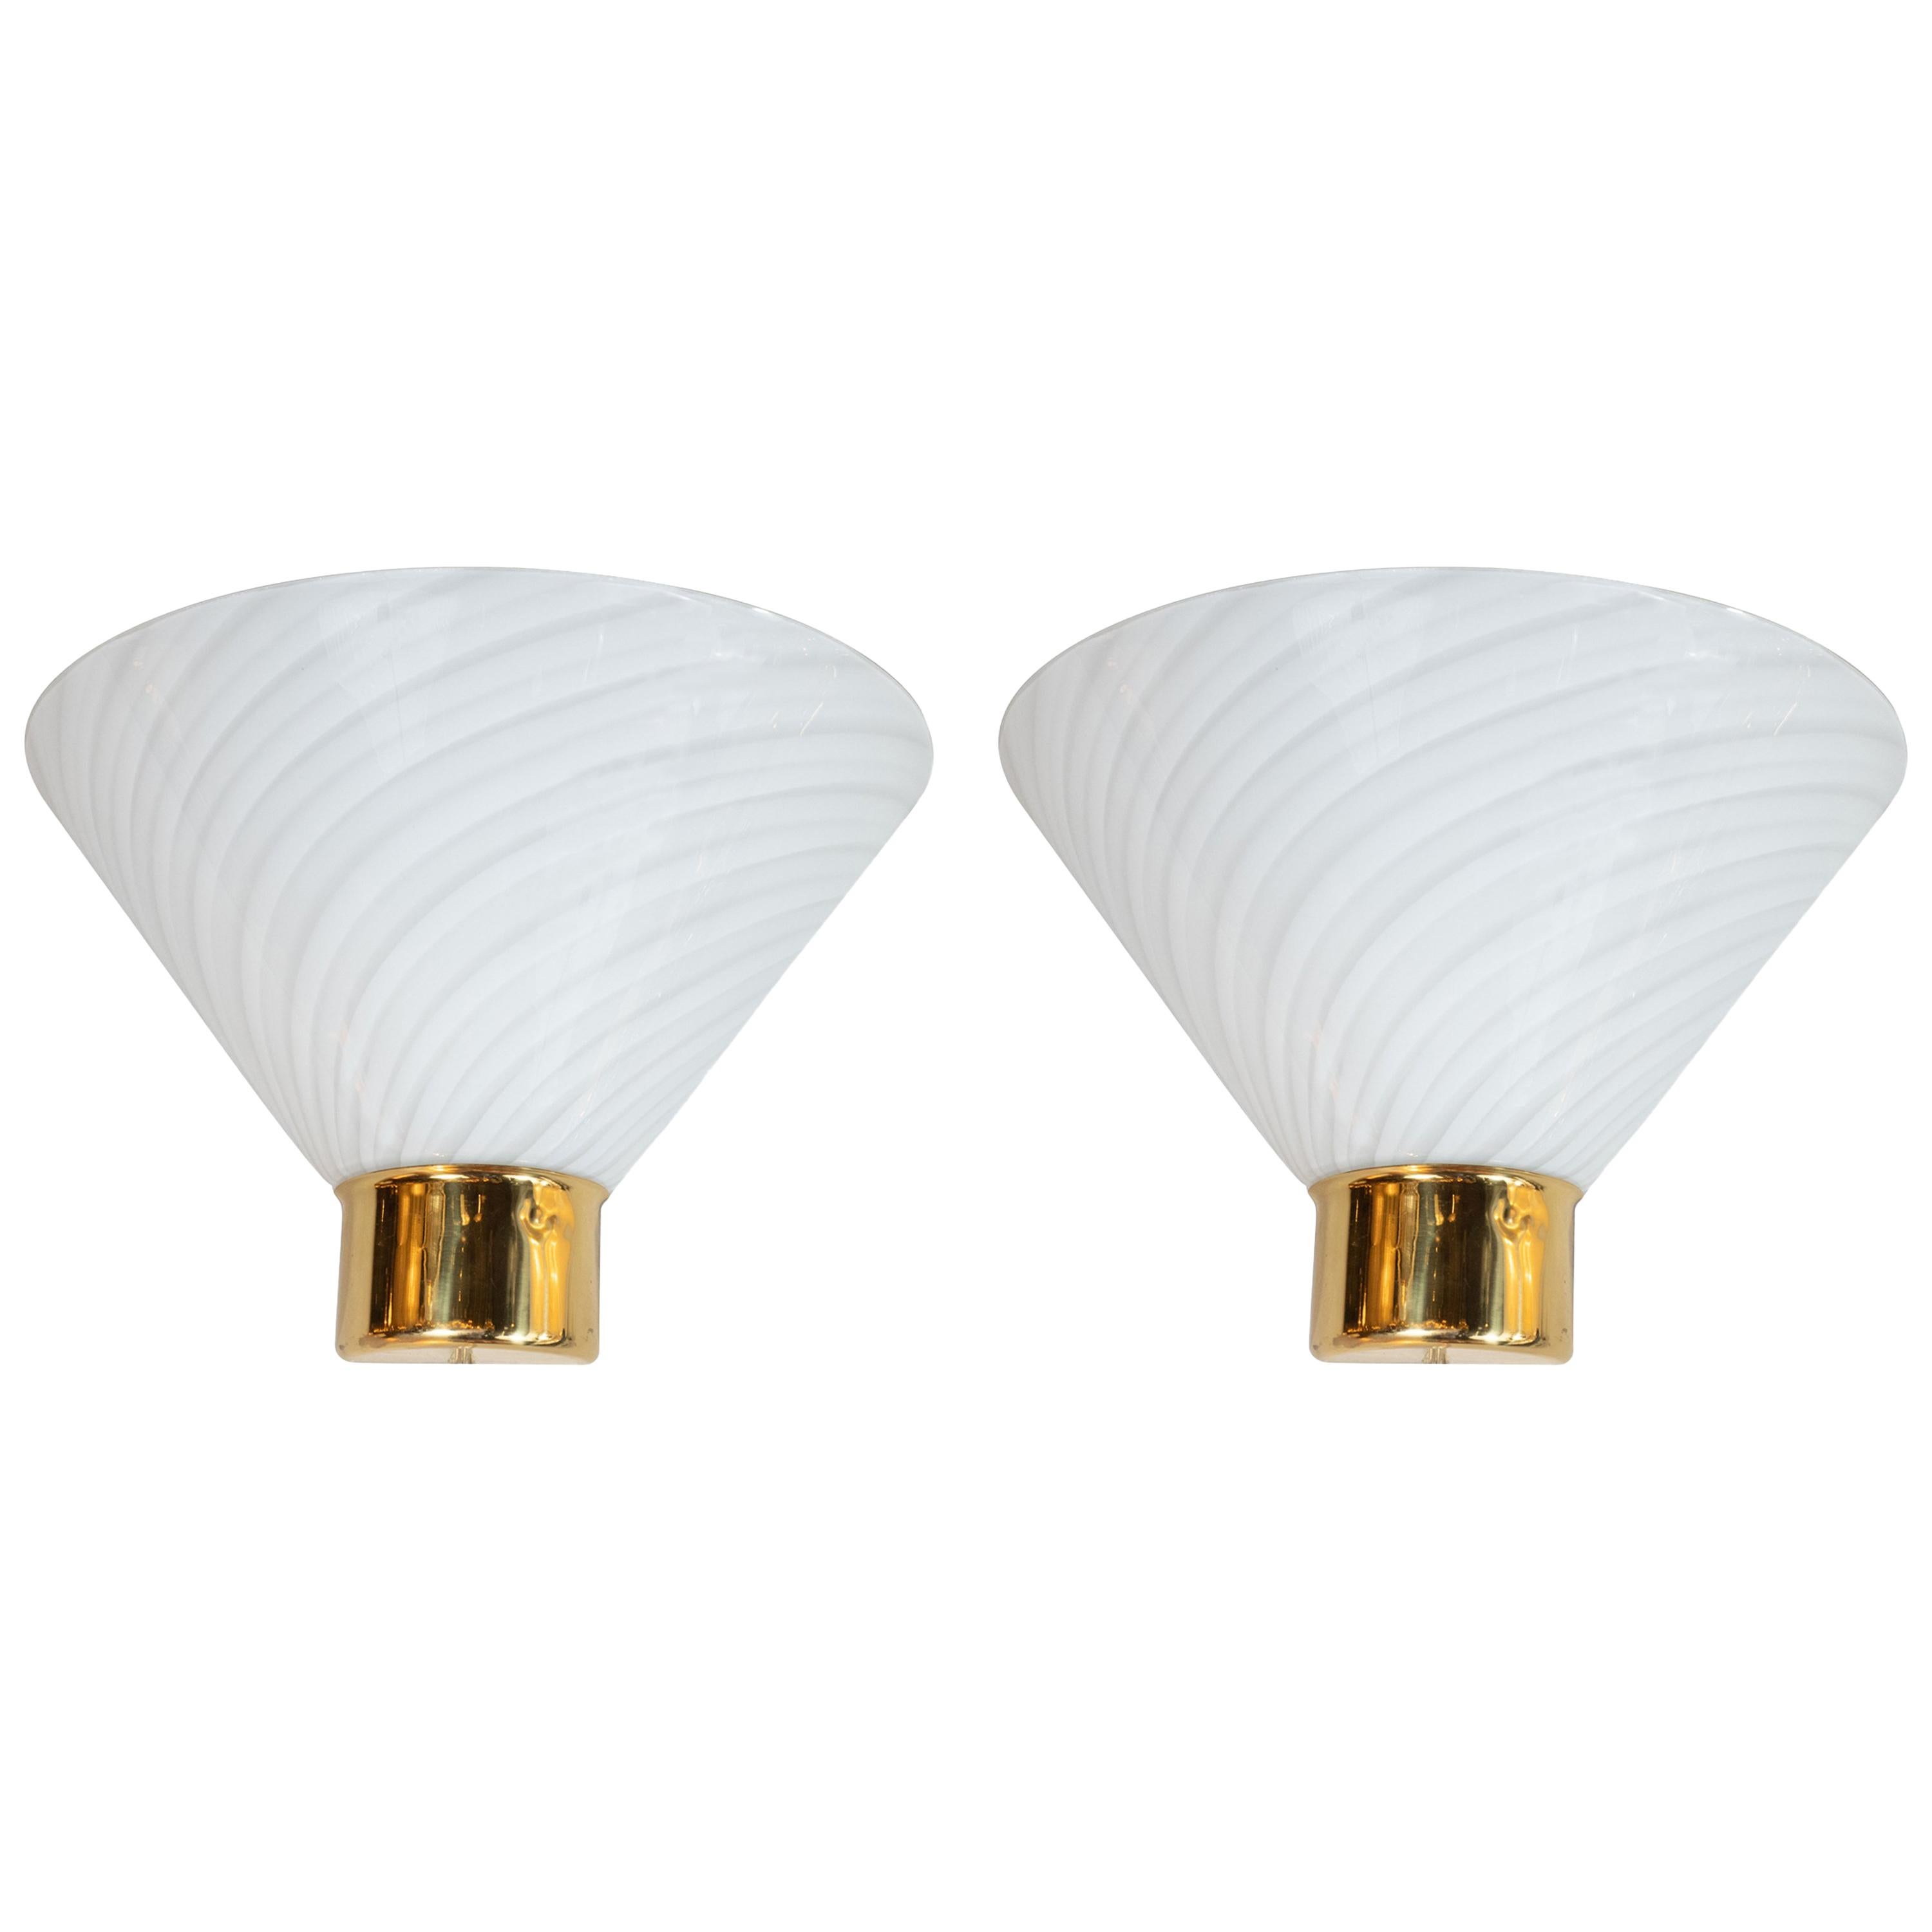 Pair of Midcentury Handblown Striated Murano Glass and Brass Sconces by Fabbian